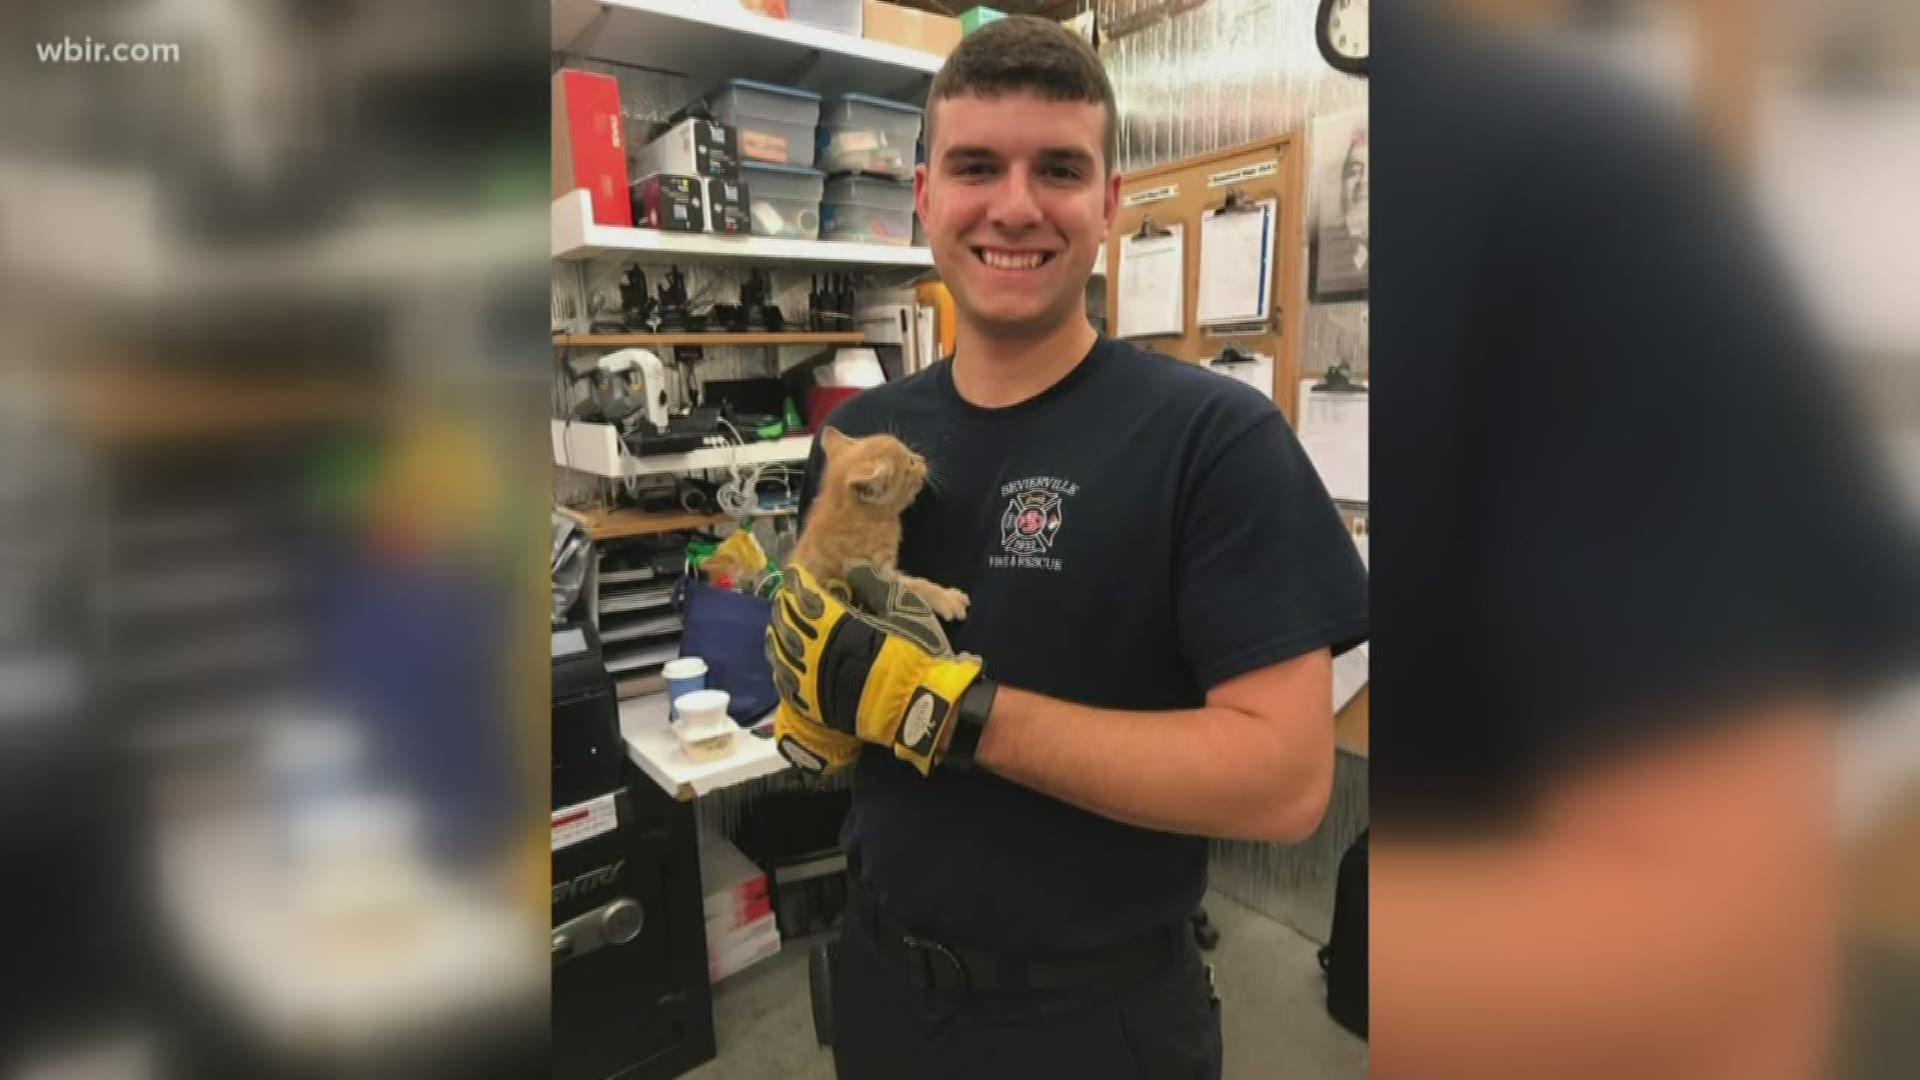 The Sevierville Fire Department saved a cat from a drain in Tanger Outlet Mall Sunday night, with help from bystanders